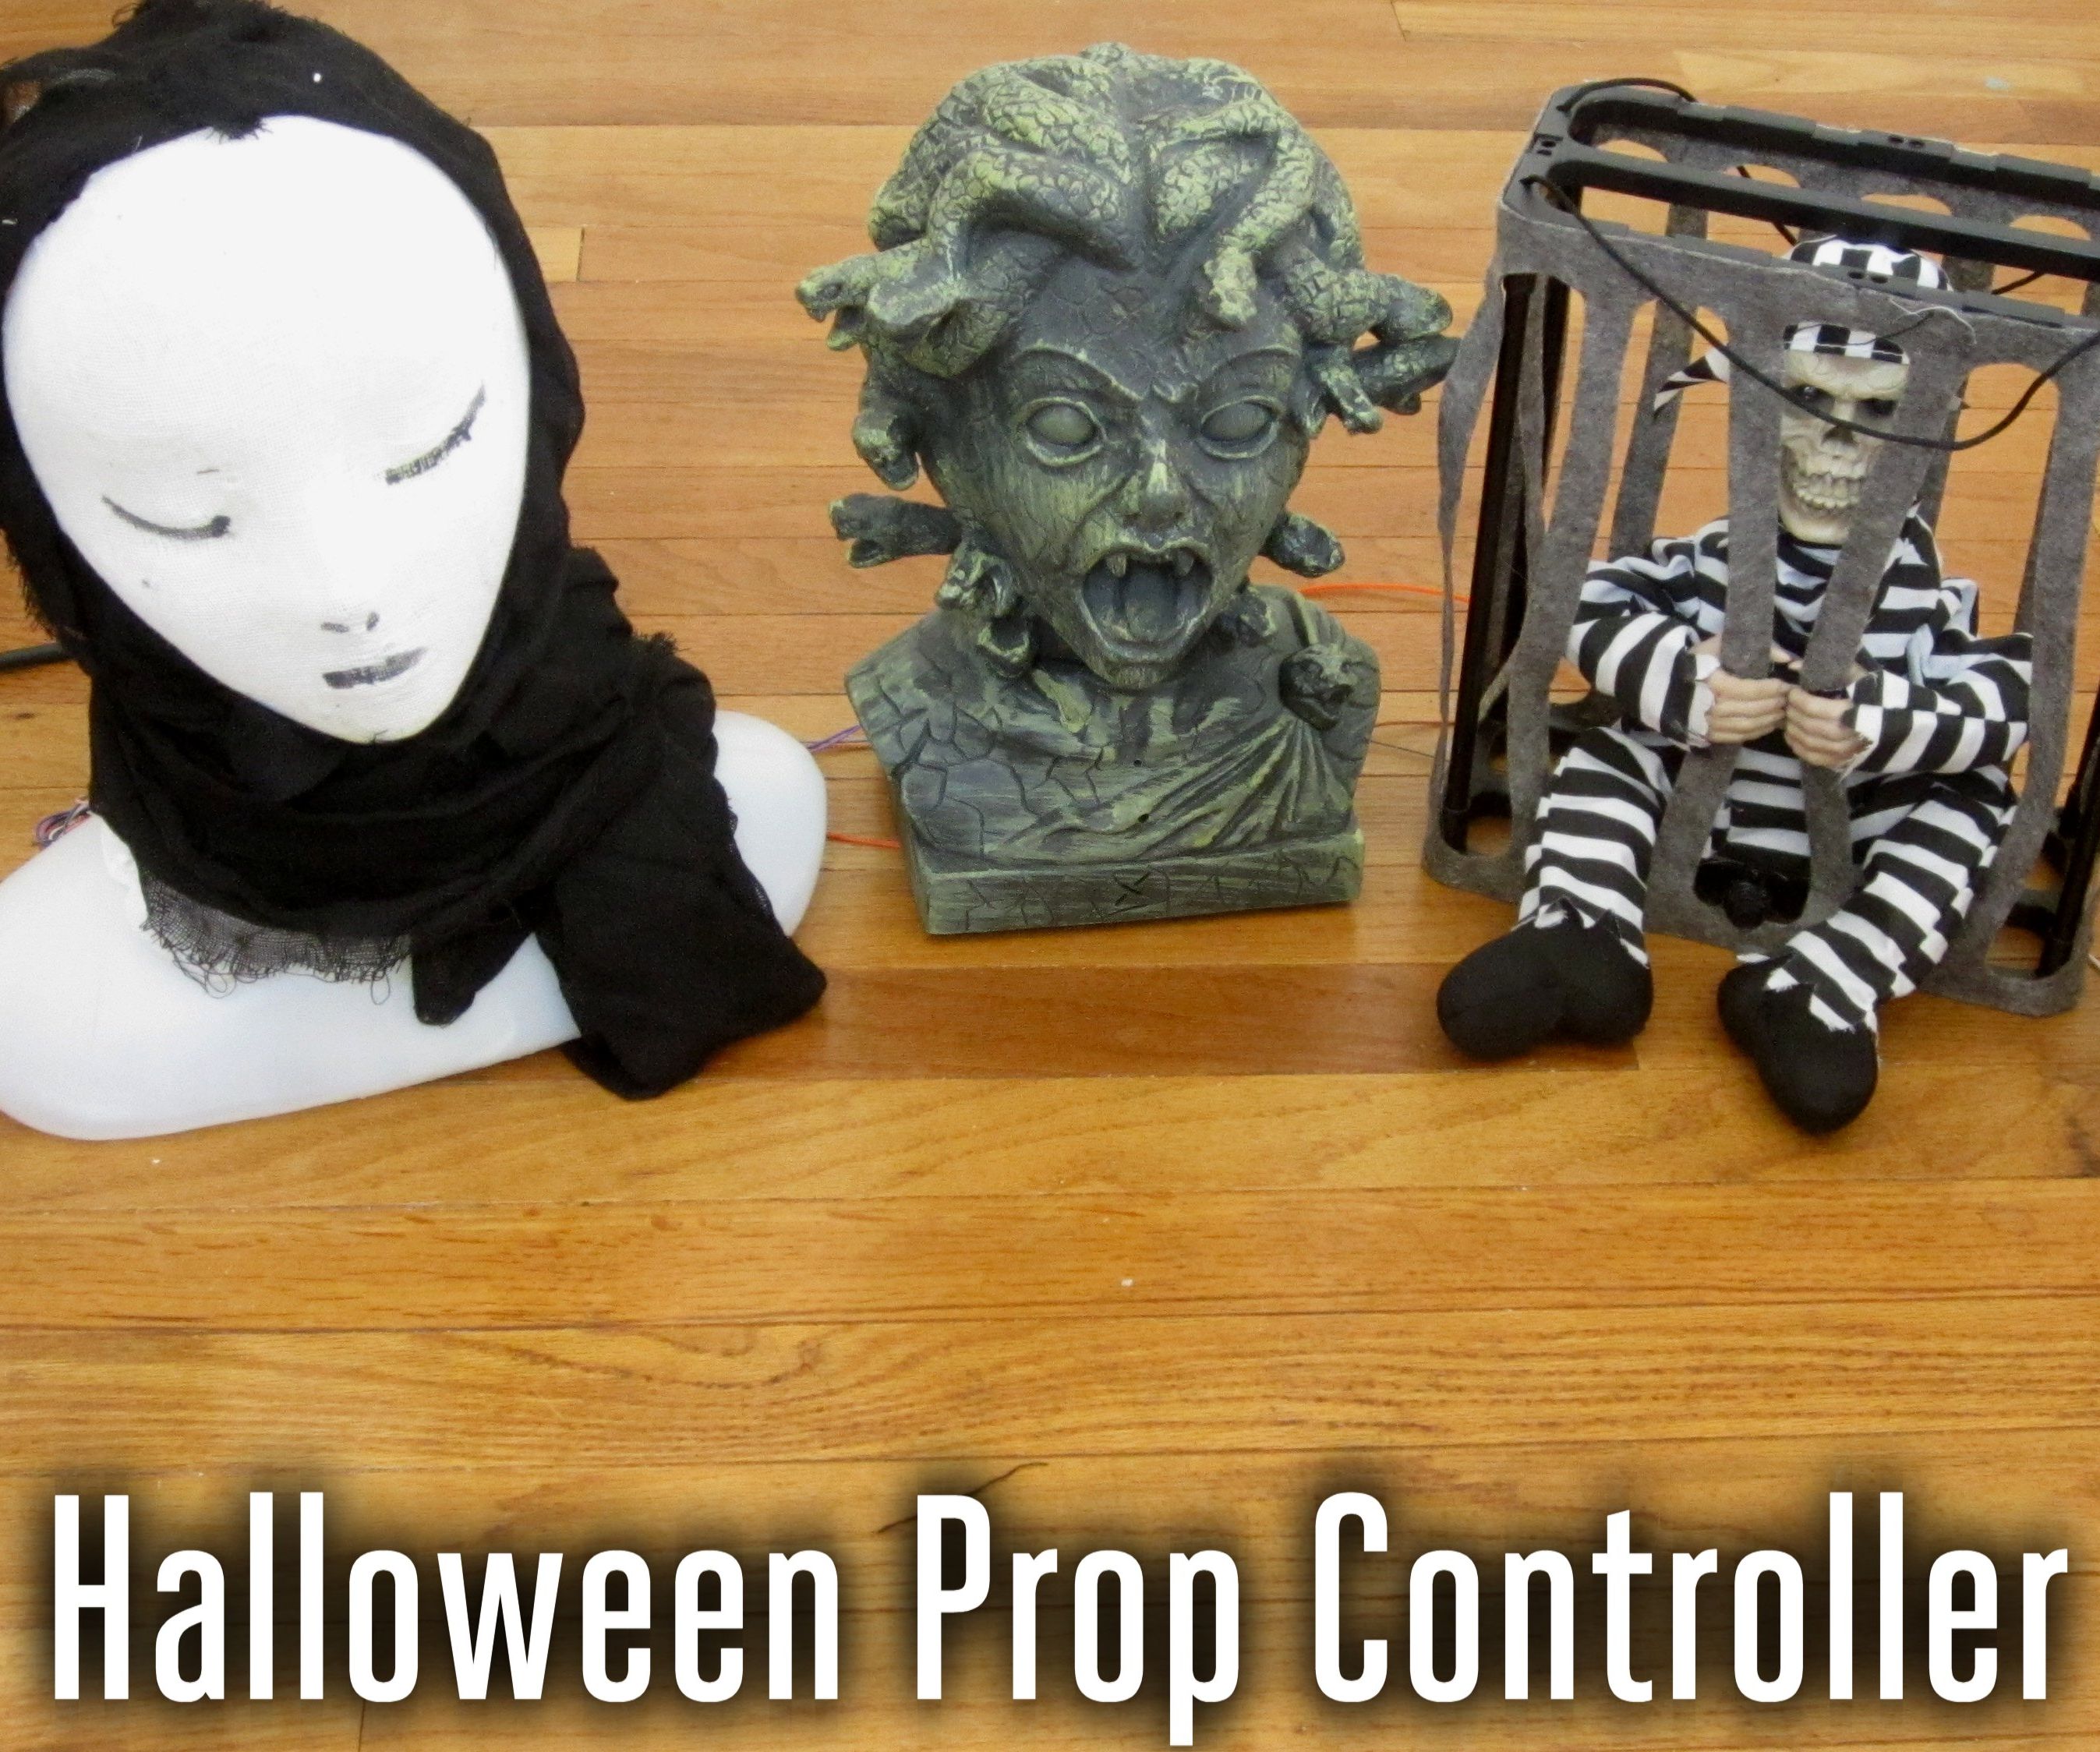 Control Your Halloween Decorations With Arduino